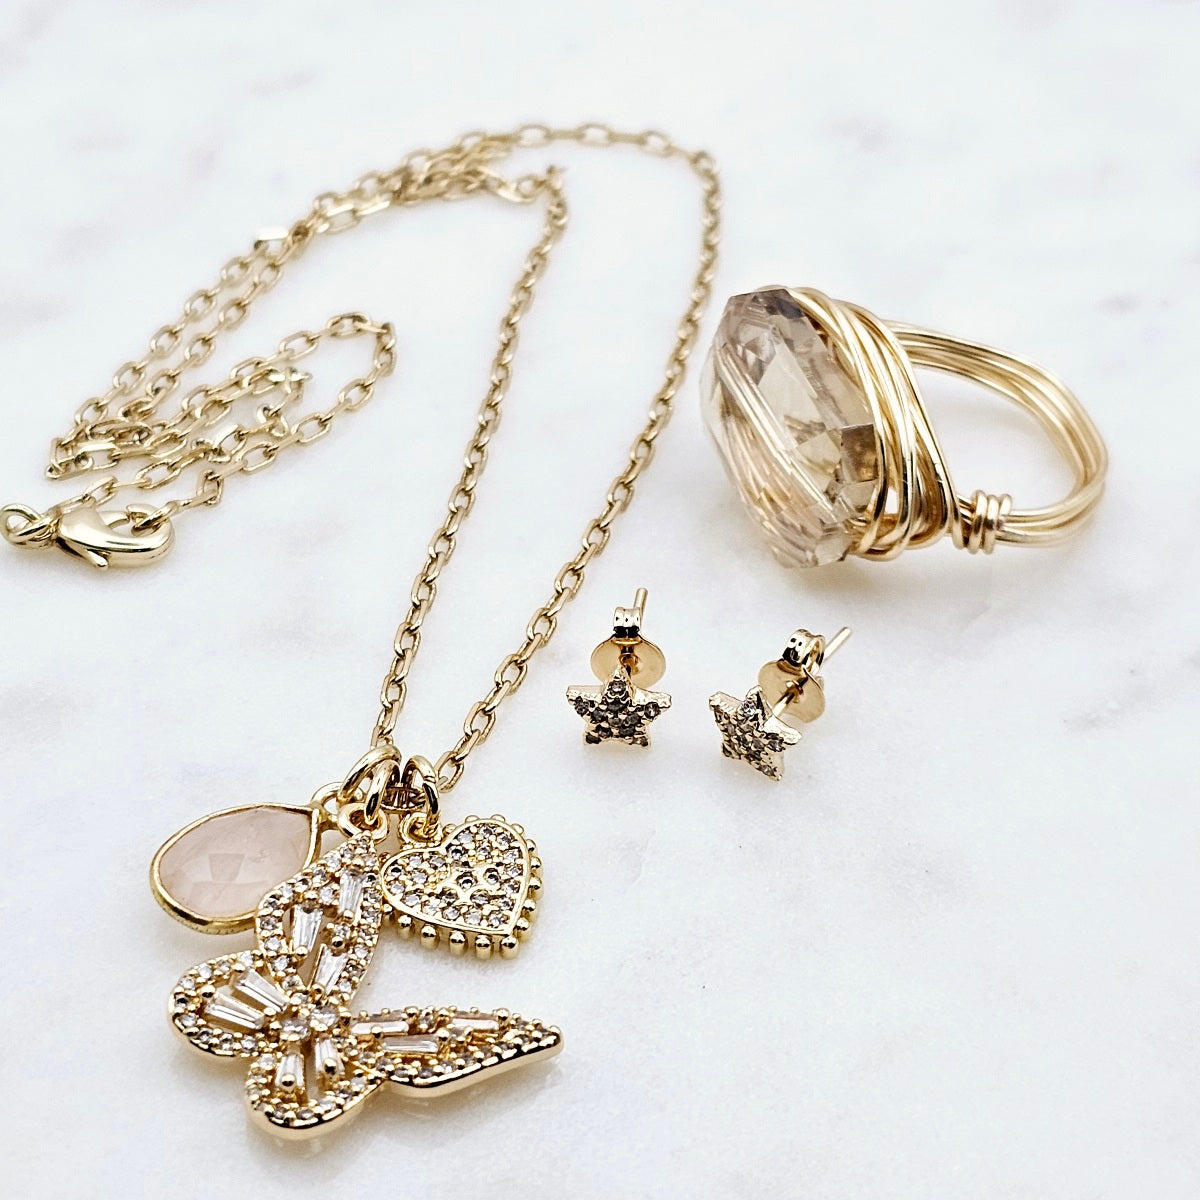 gold filled pave butterfly rose quartz stone and pave heart multi charm pendant necklace